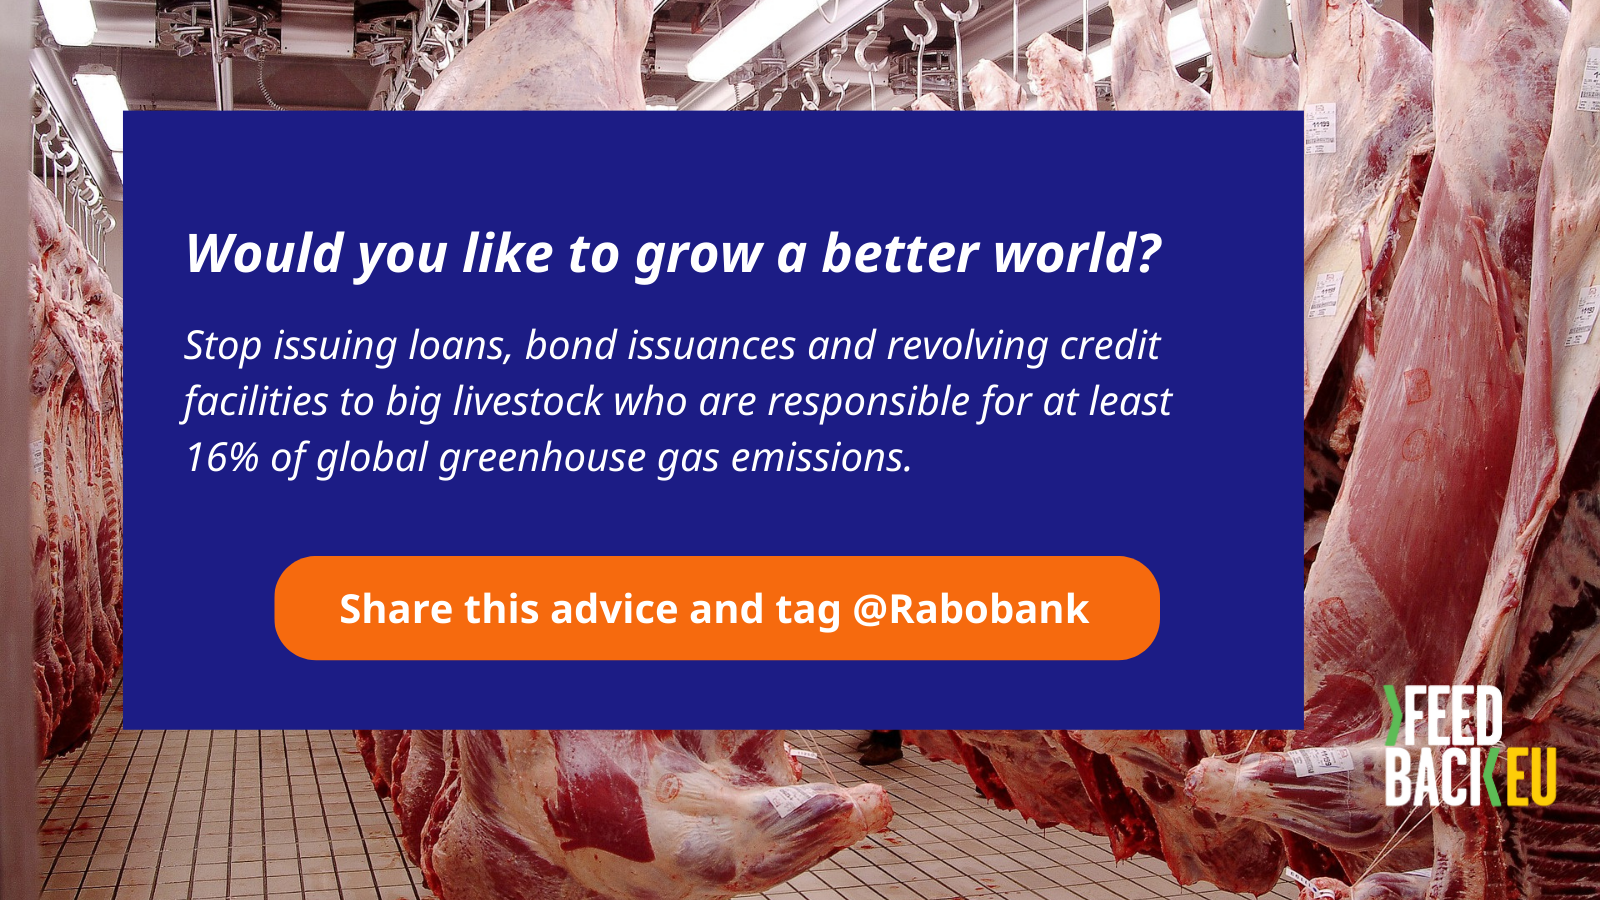 Press release: Rabobank called on to stop financing industrial meat and dairy production